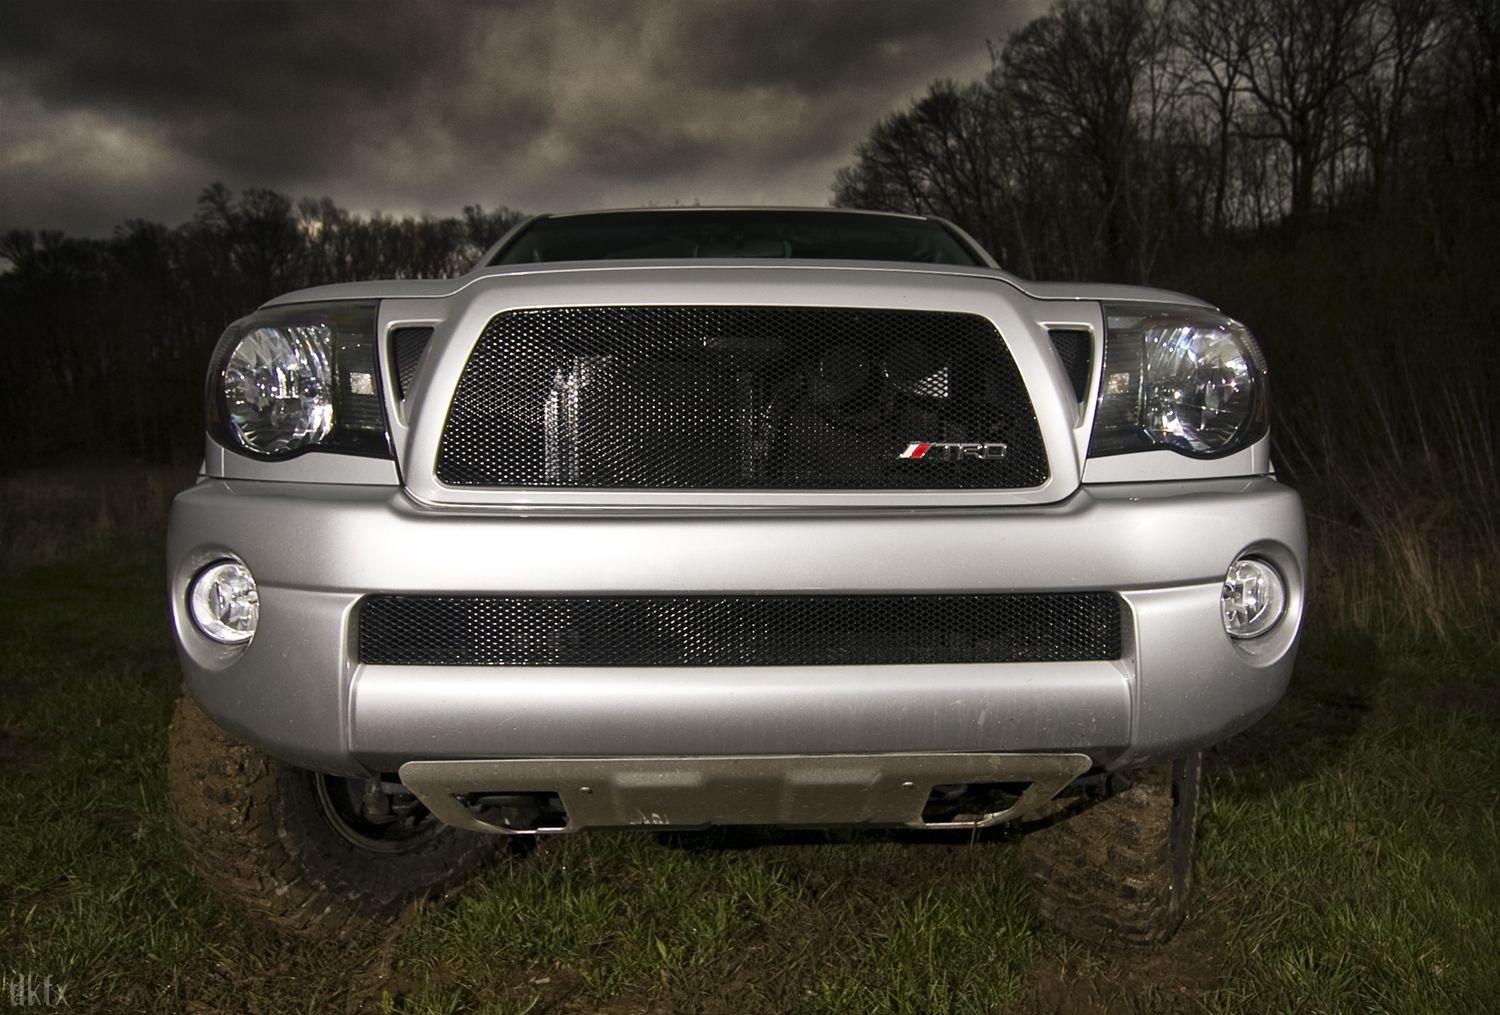 Silver Toyota Tacoma with Blacked Out Mesh Grille - Photo by dan kinzie